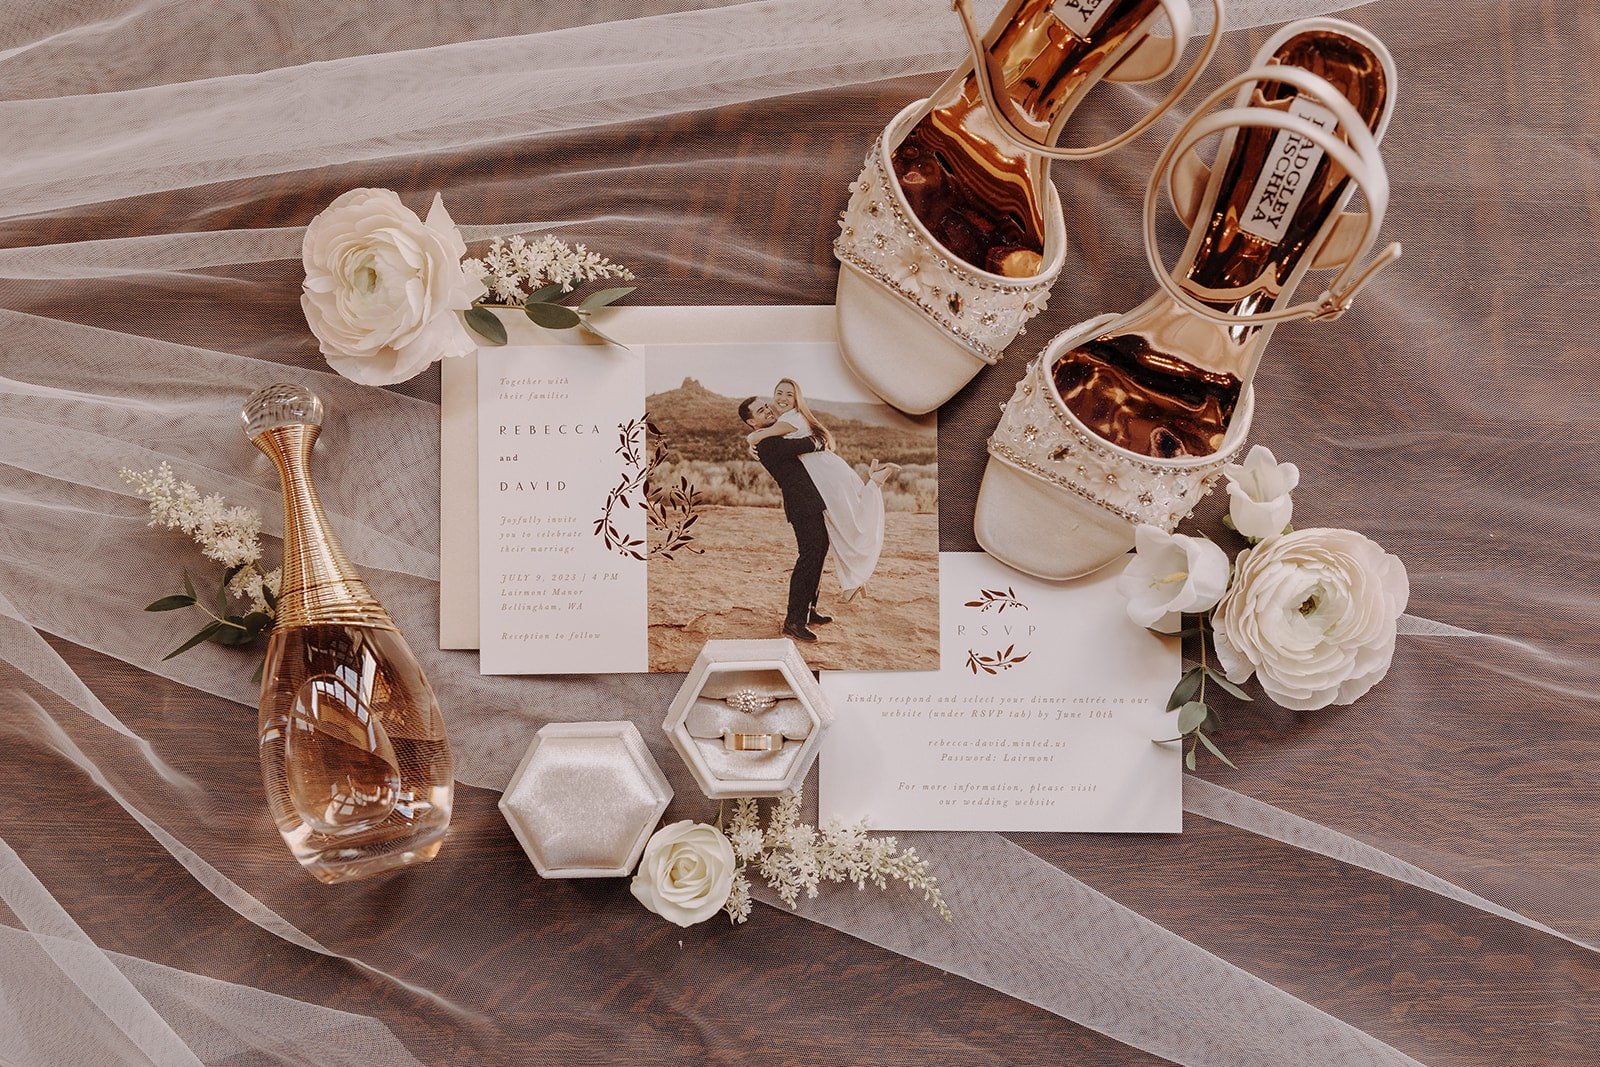 White and rose gold wedding details at Lairmont Manor wedding